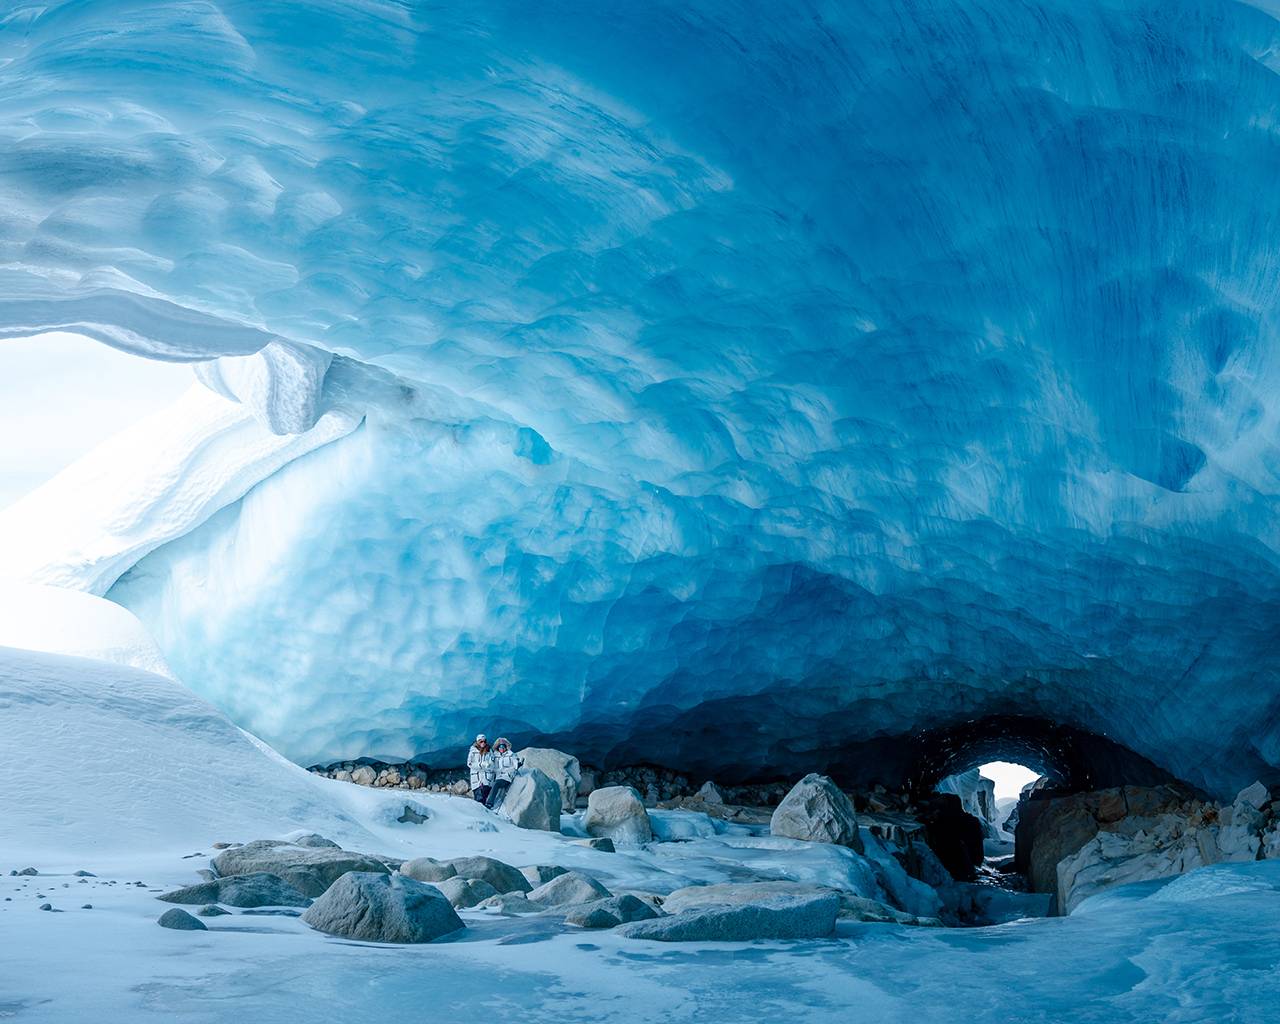 Heli ice cave tour visit a large ice cave with an interpretive guide